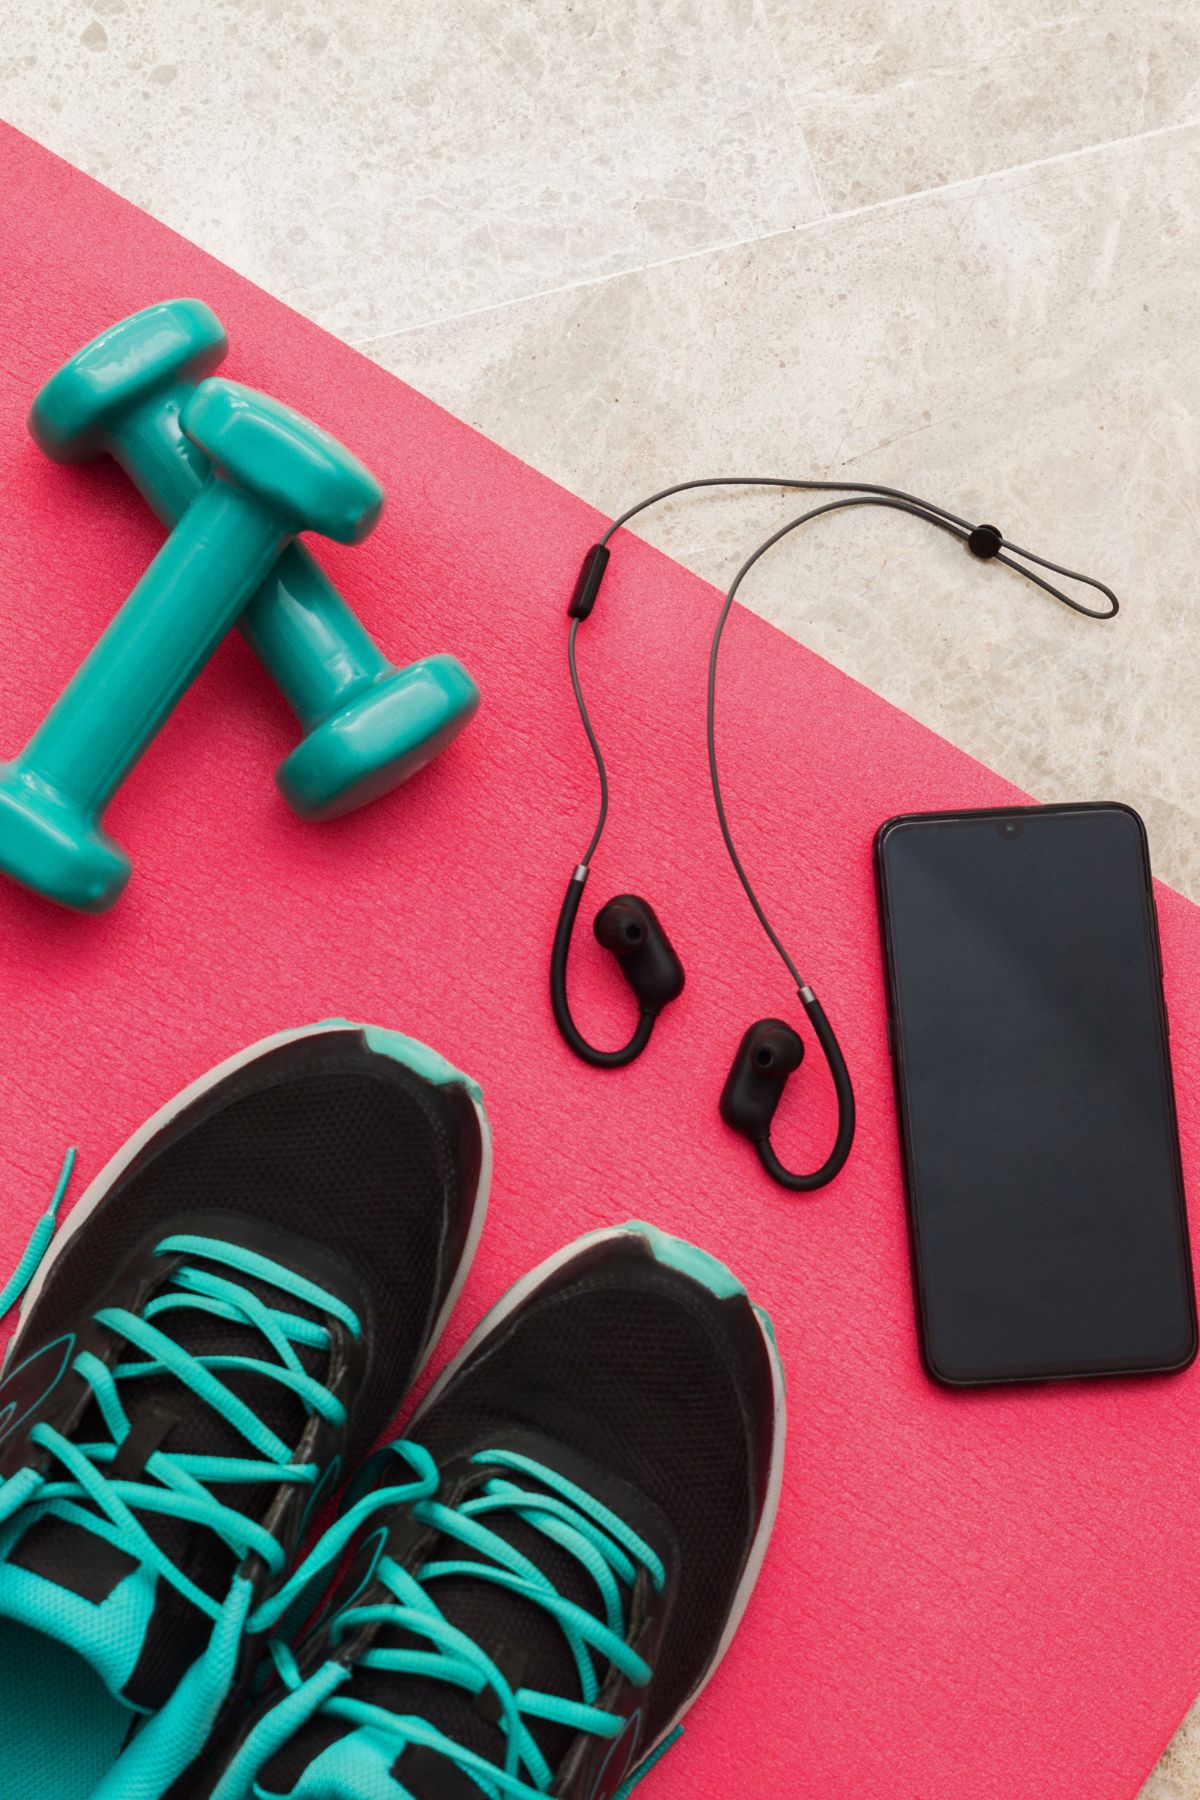 weights, tennis shoes, and a cellphone with ear buds on a yoga mat.